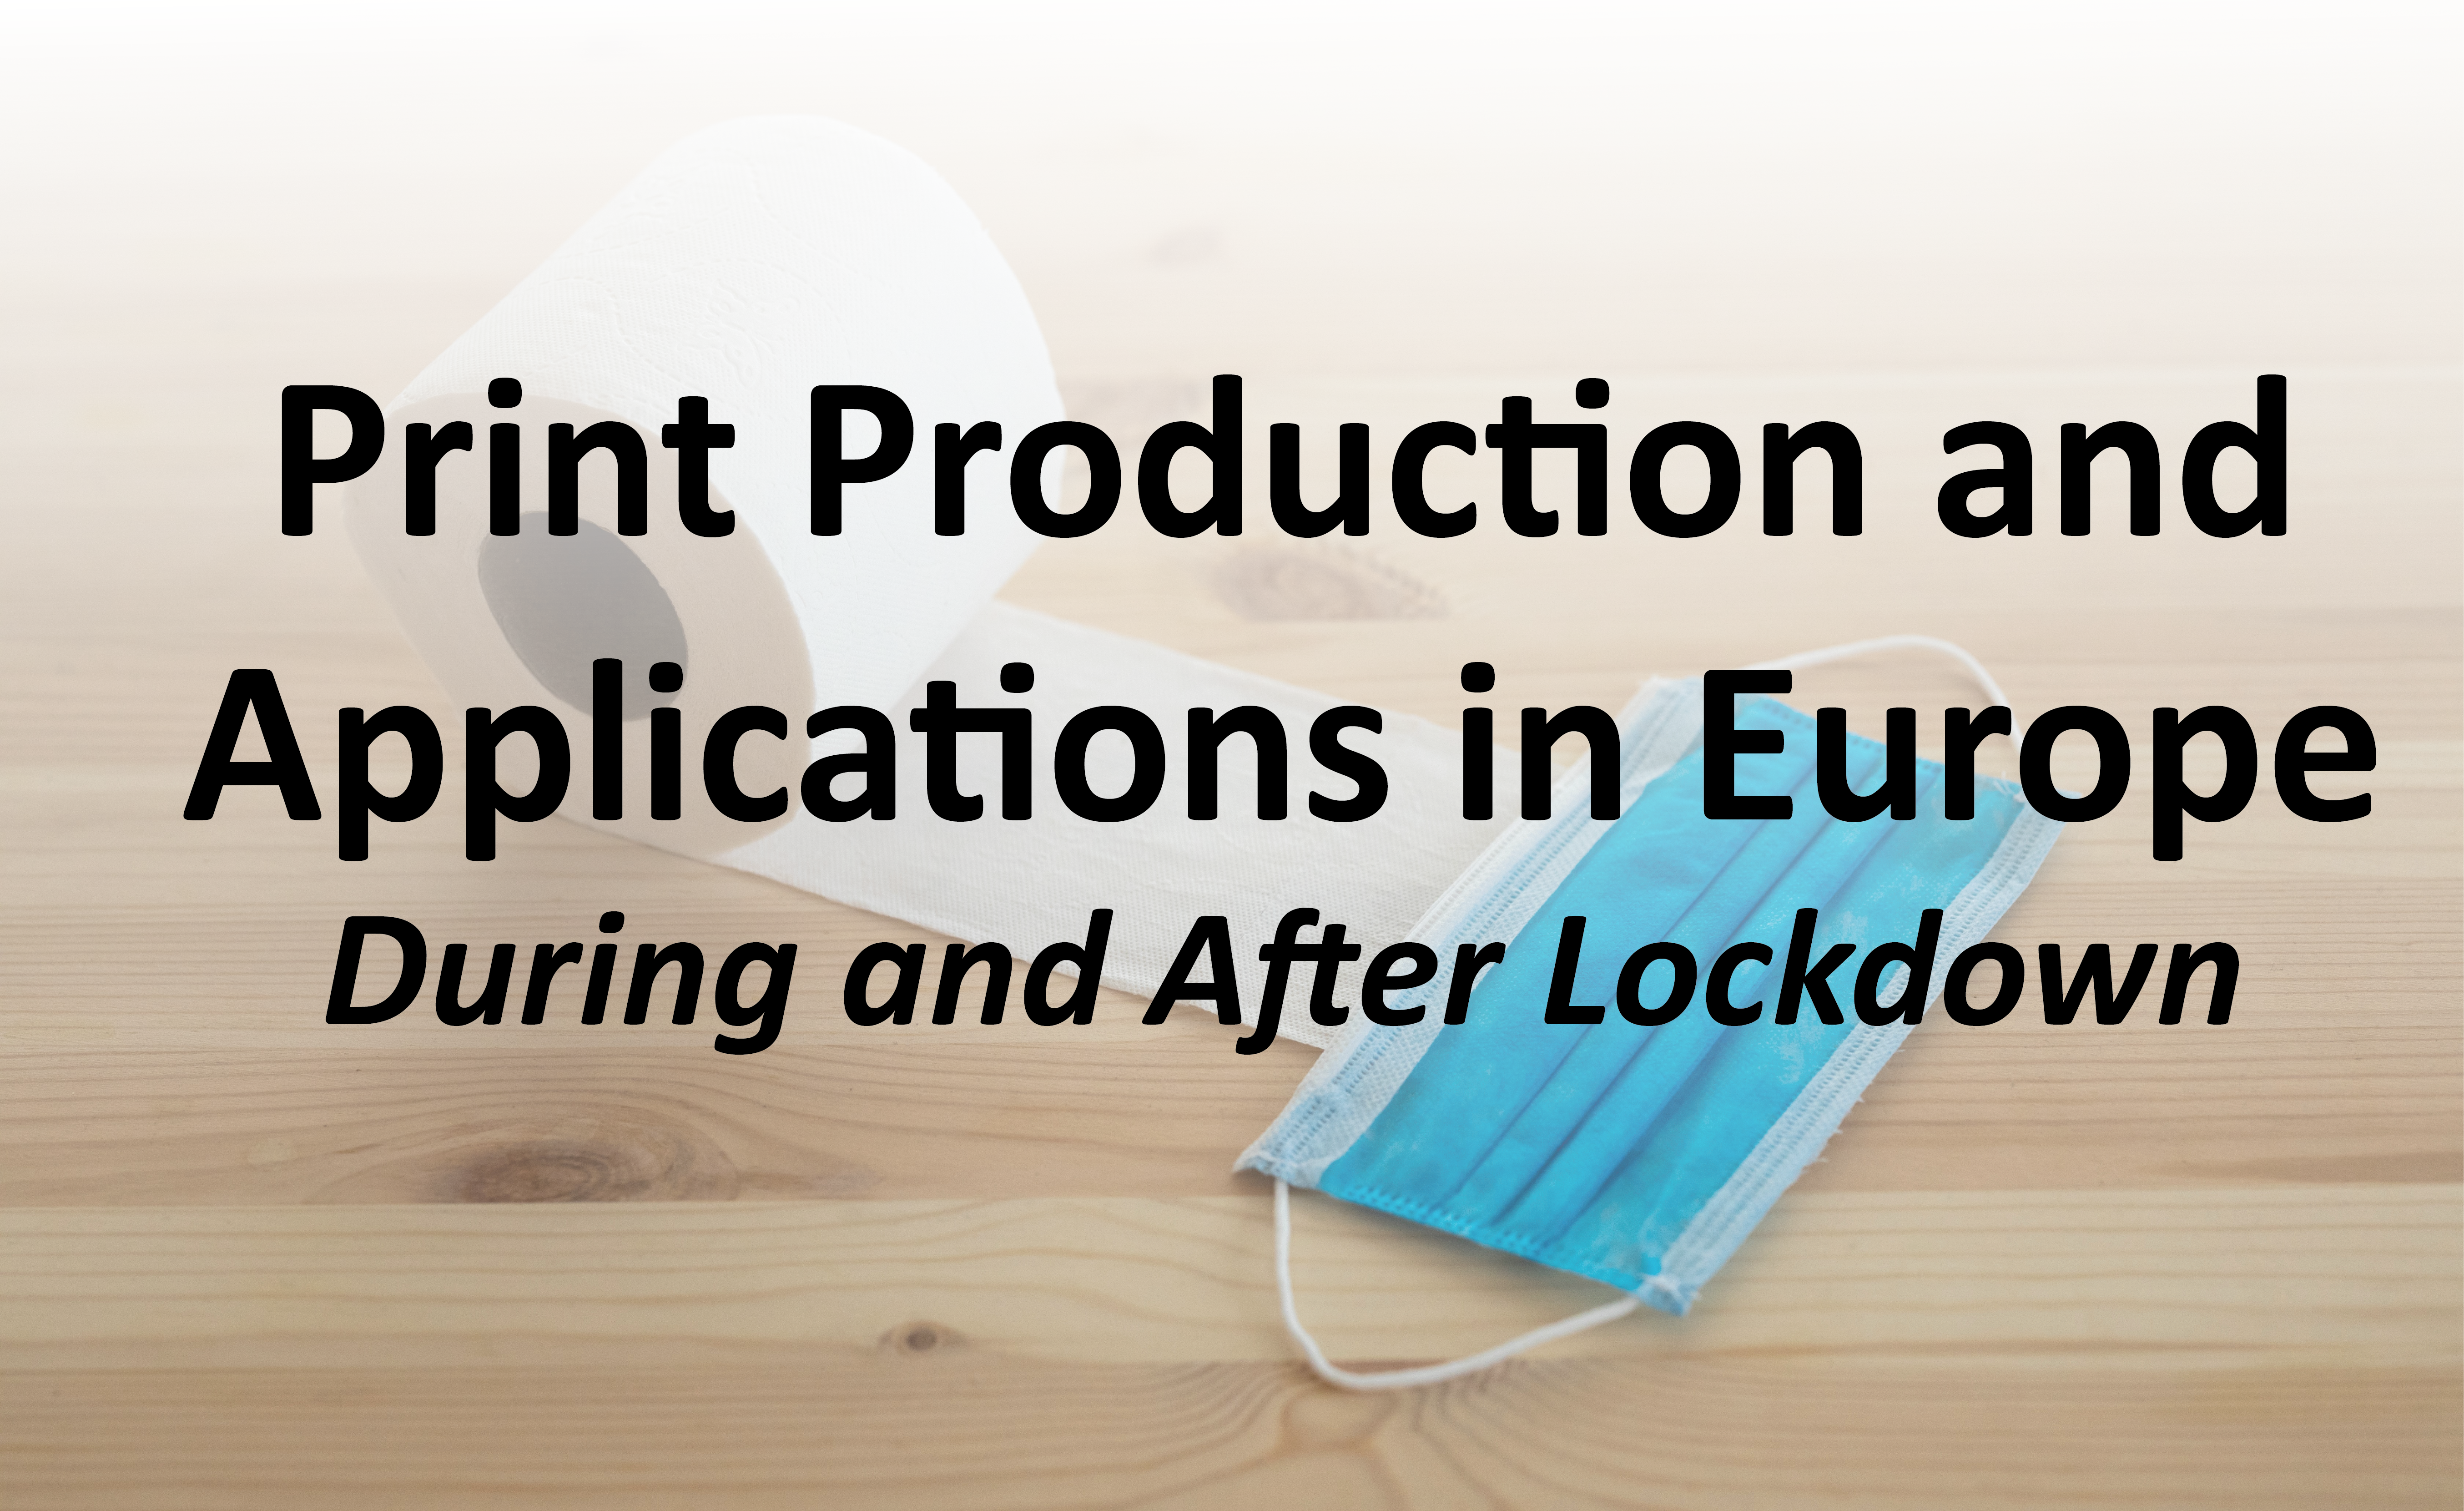 Featured image for “Print Production and Applications in Europe During and After Lockdown”